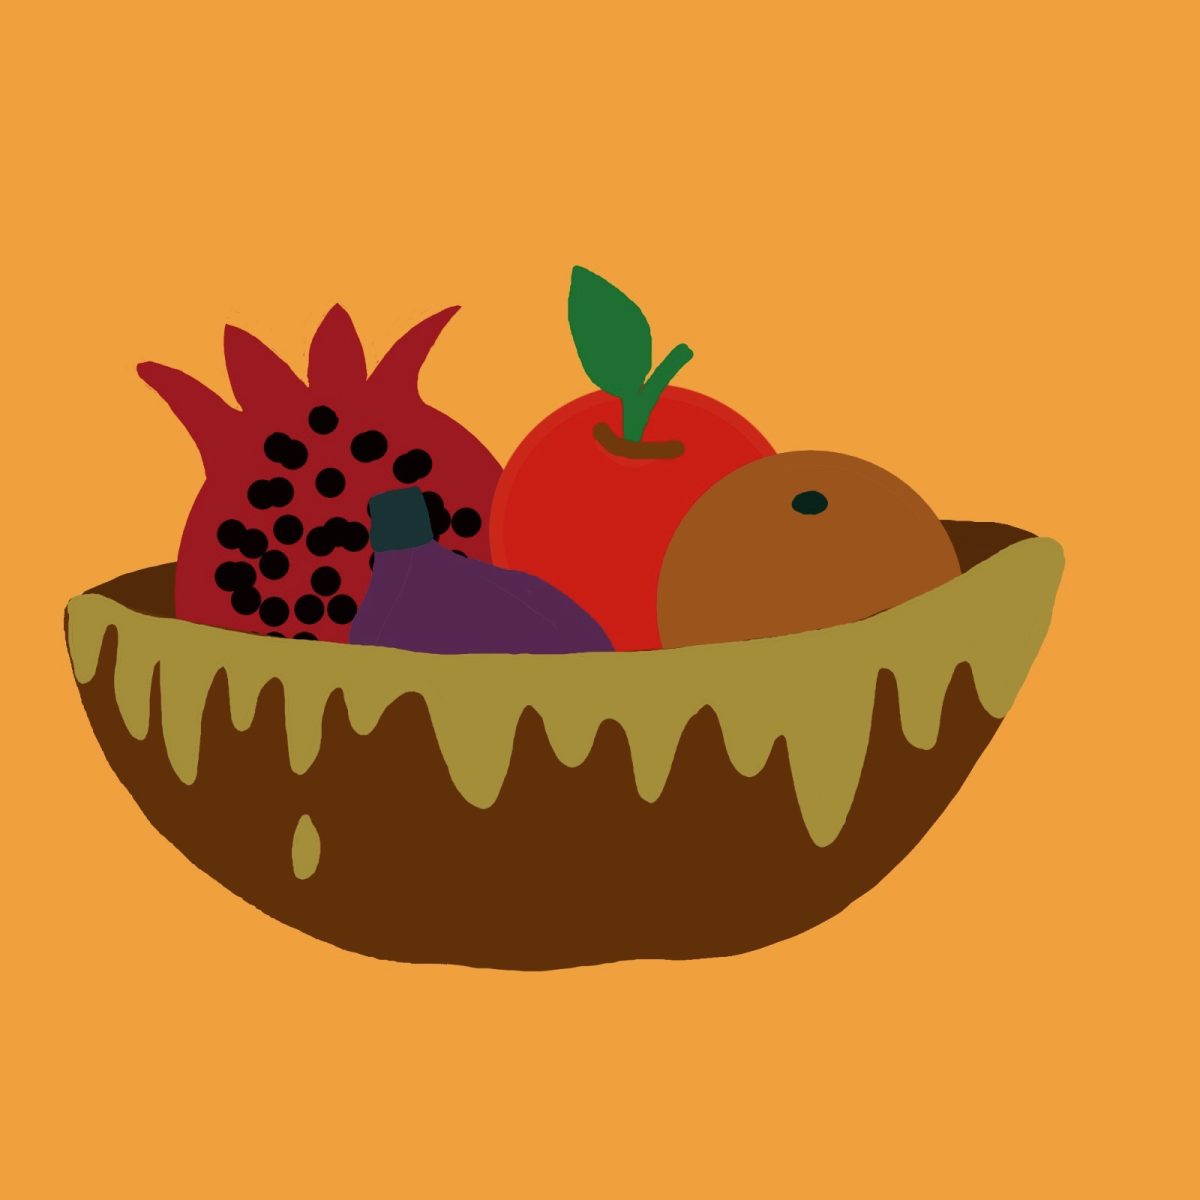 On the second night of Rosh Hashanah, it’s customary to eat a fruit you haven’t eaten in a while. The reason is to be sure that there is something to celebrate with a bracha.